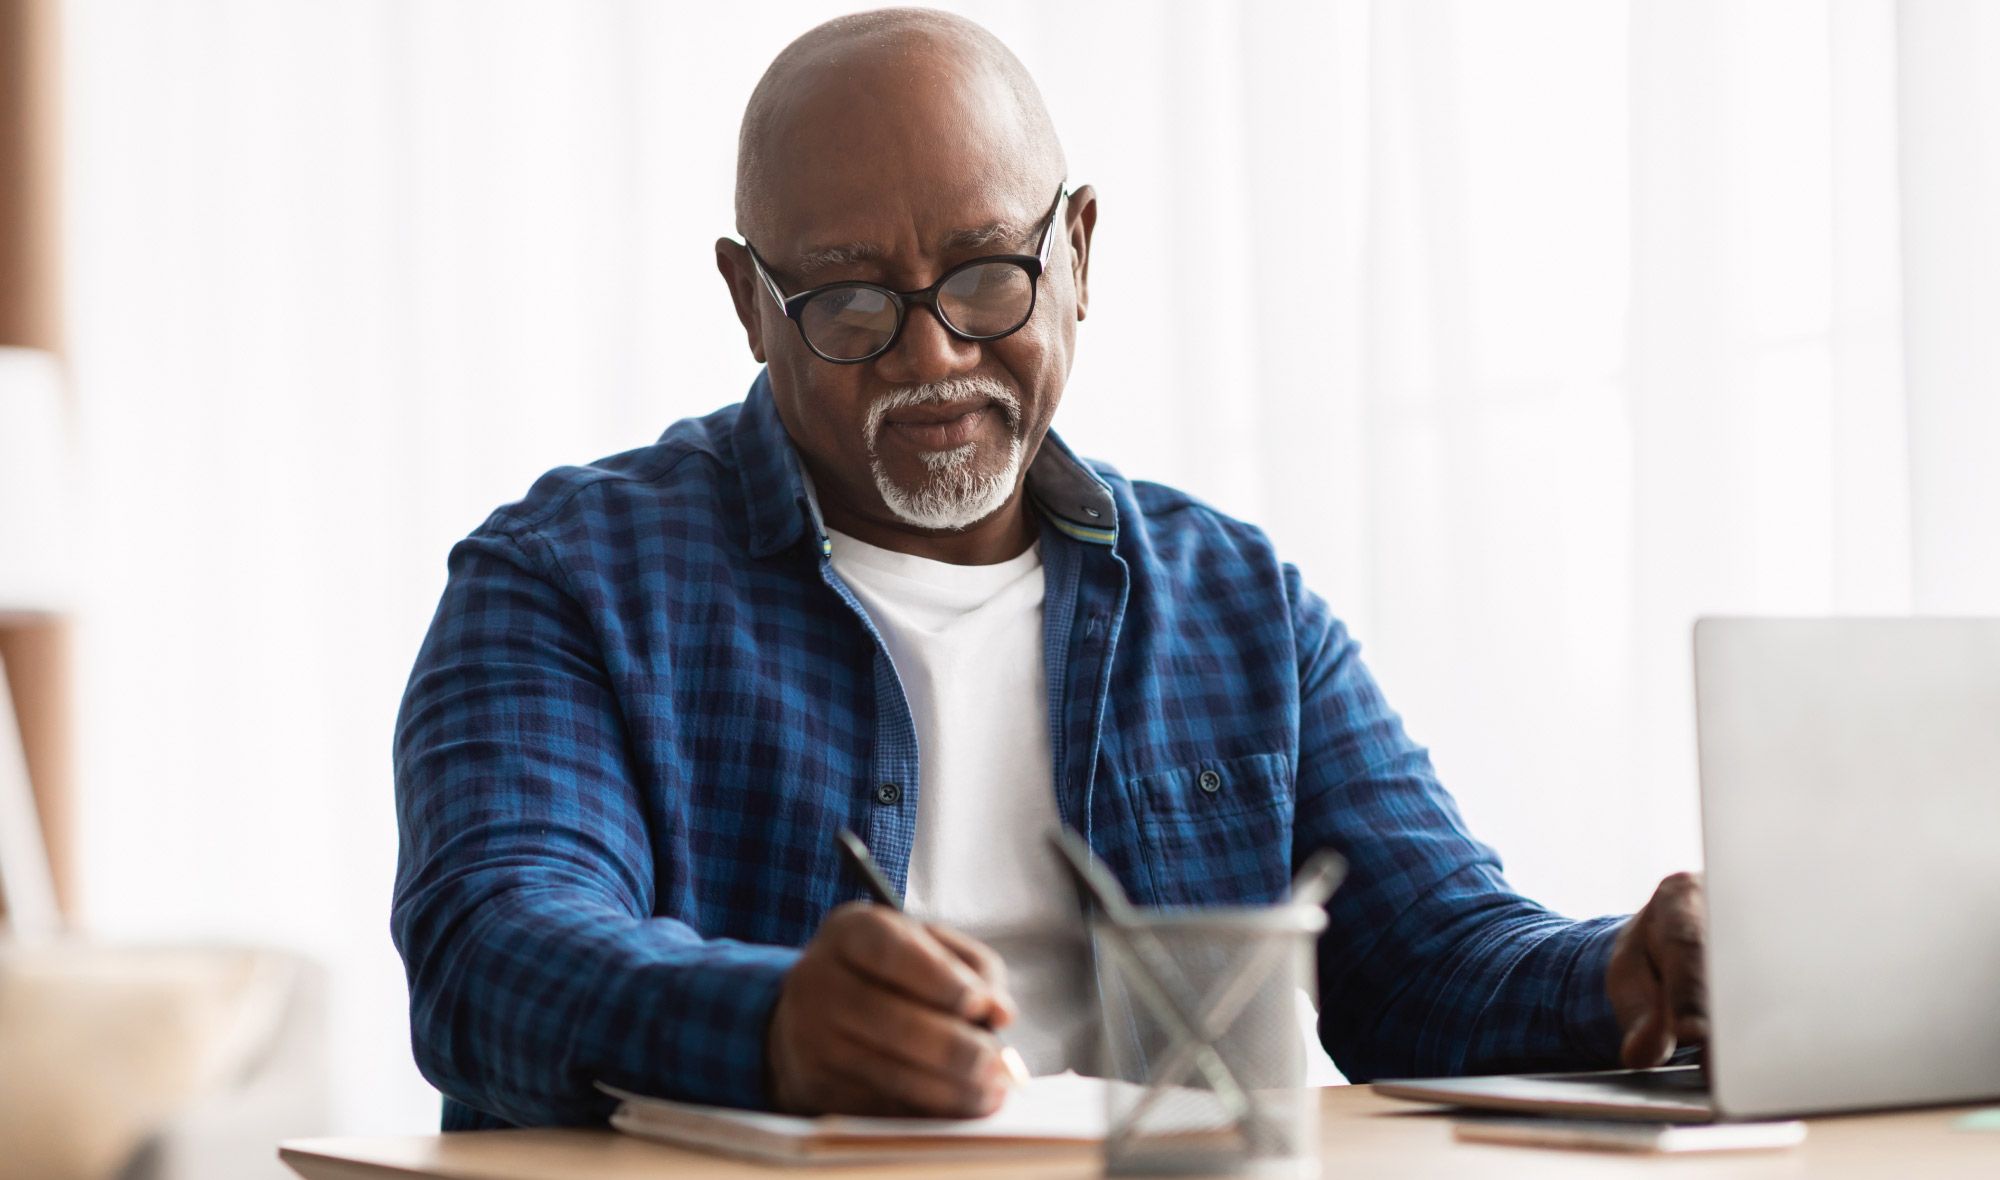 Emotional signs you need to retire - old black man thinking about retire